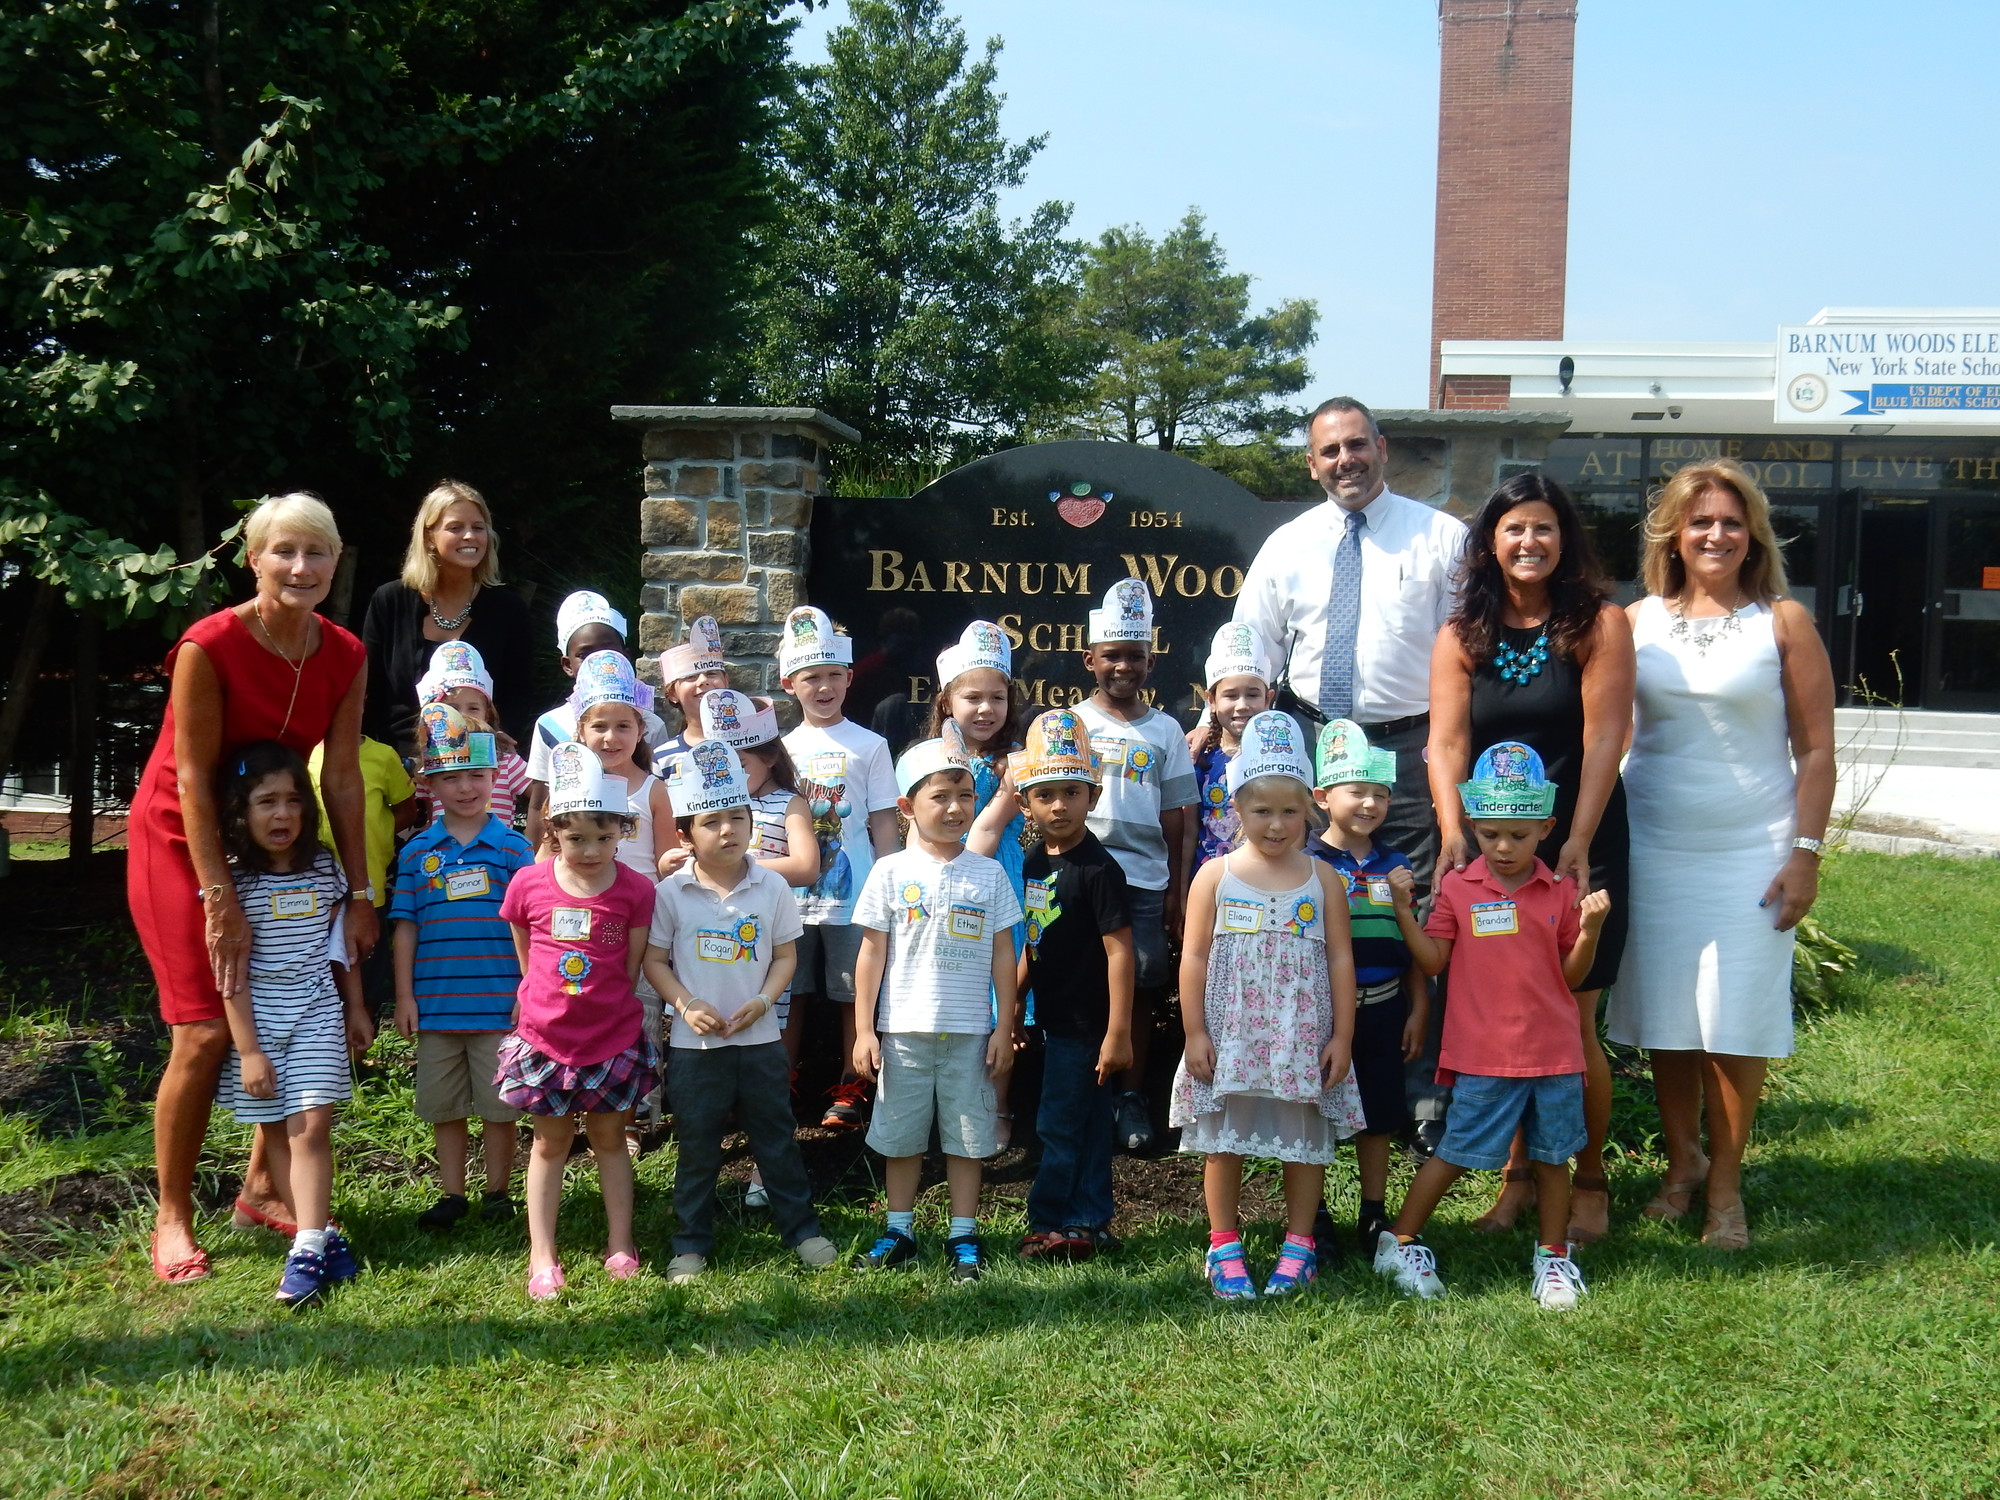 Patty Kelleher’s kindergarten class, with teachers and administrators at Barnum Woods Elementary School were excited (well, almost of them) to begin their first day of school.